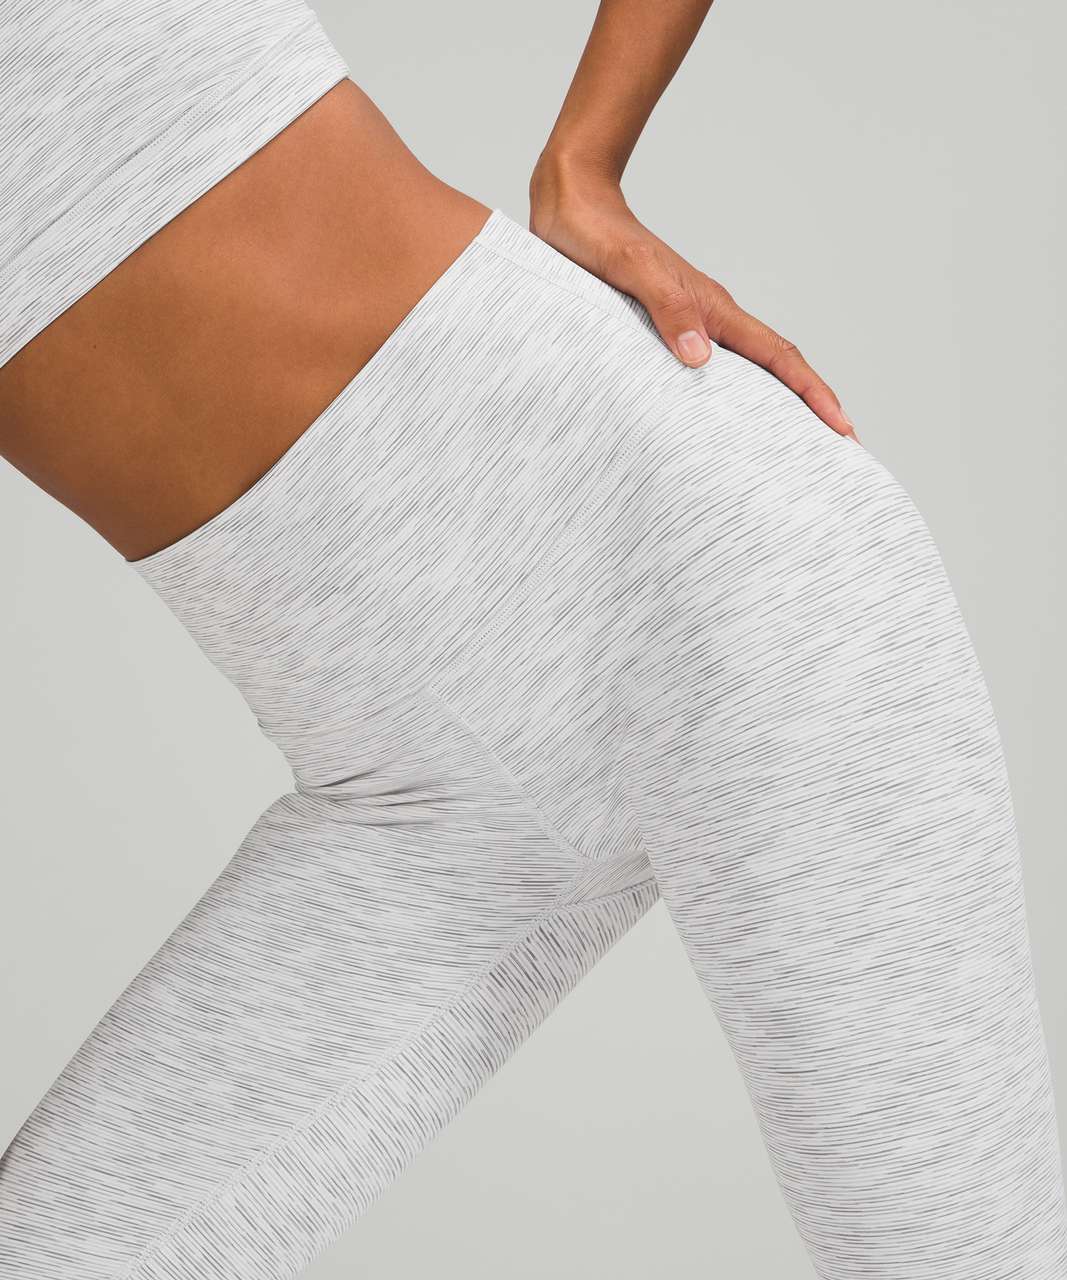 Lululemon Wunder Under High-Rise Crop 23" *Full-On Luxtreme - Wee Are From Space Nimbus Battleship